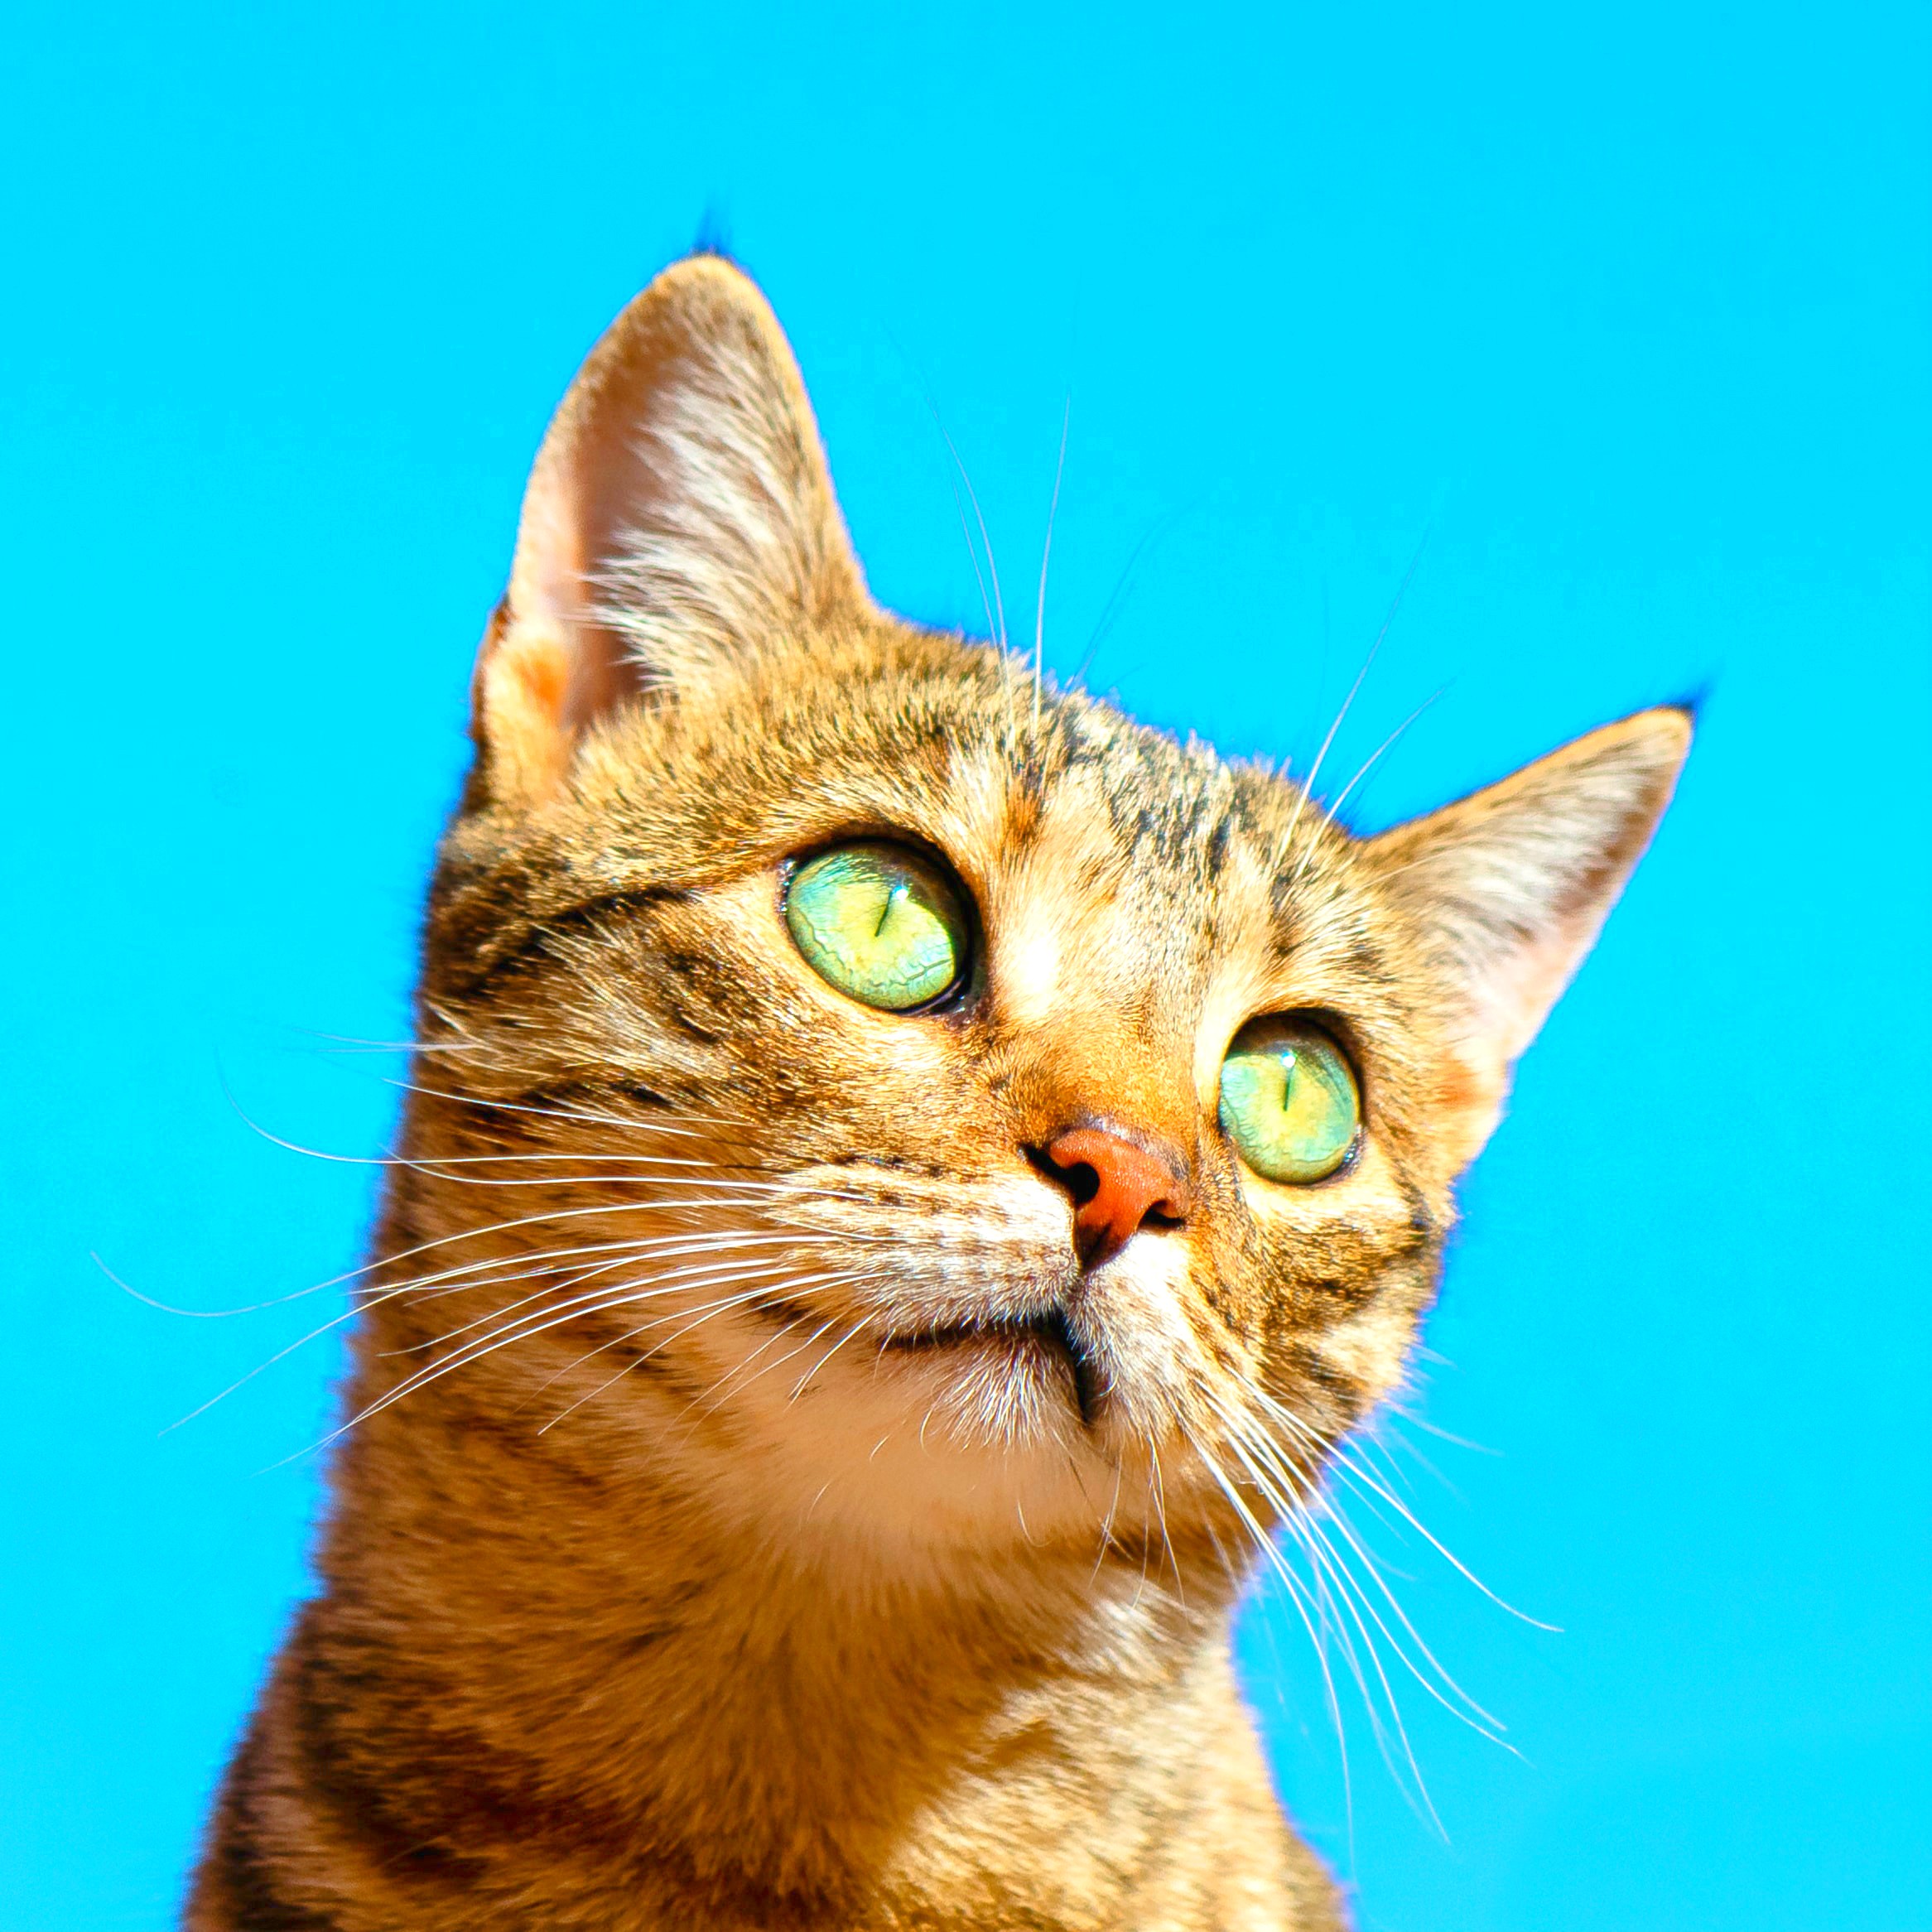 <img src="cat.jpg" alt="cat blue sky why pets can boost your mental health"/> 